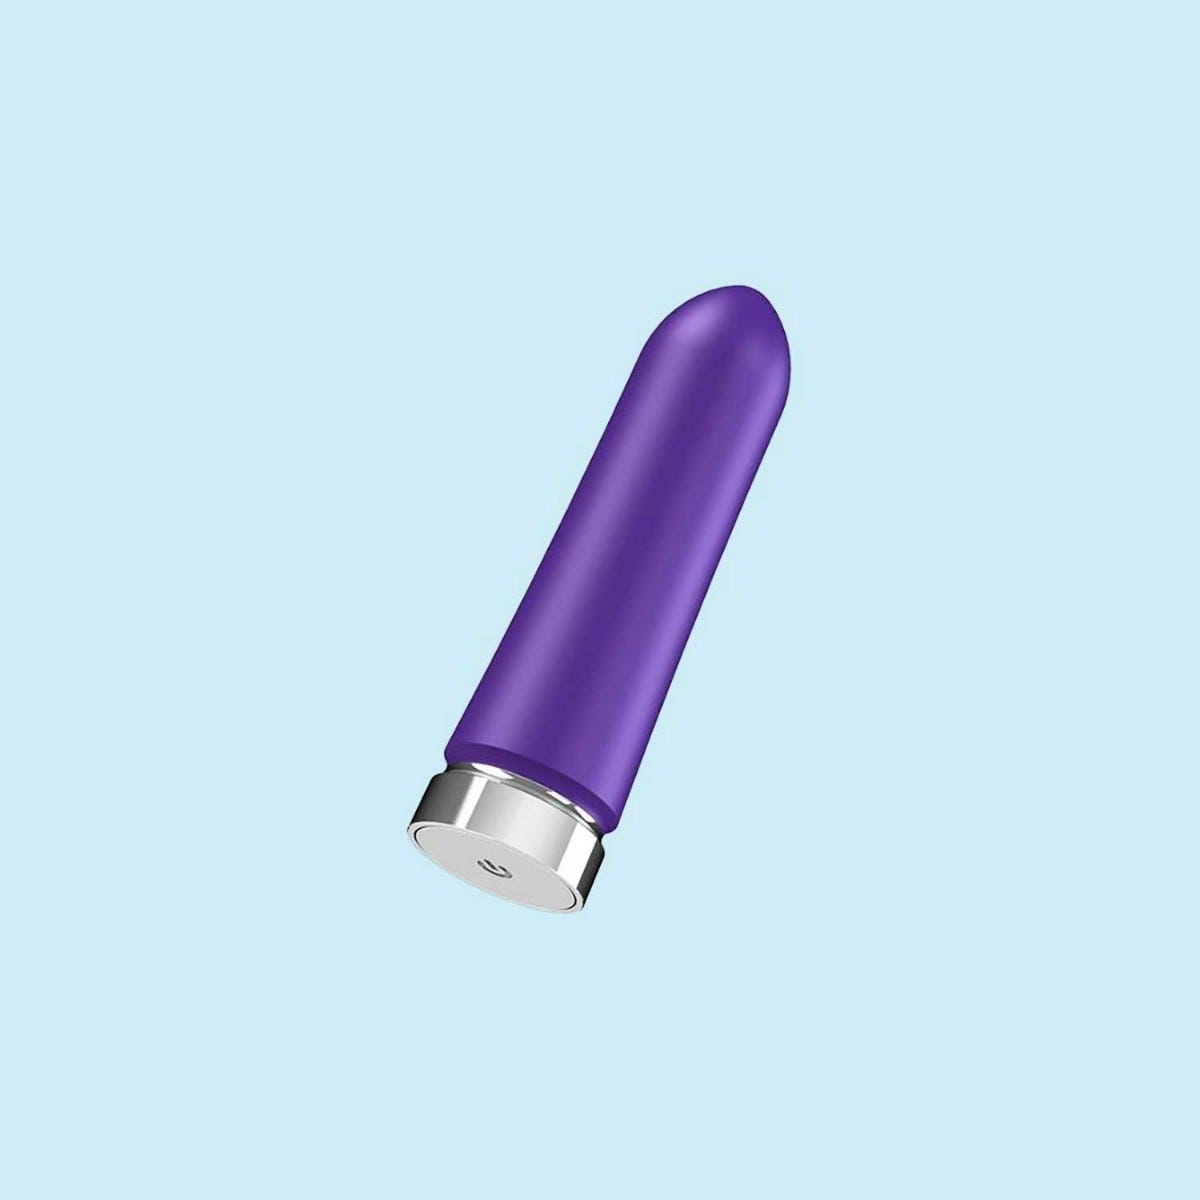 BAM BULLET VIBRATOR 3.4 INCH in purple is a fun sex toy for couples.